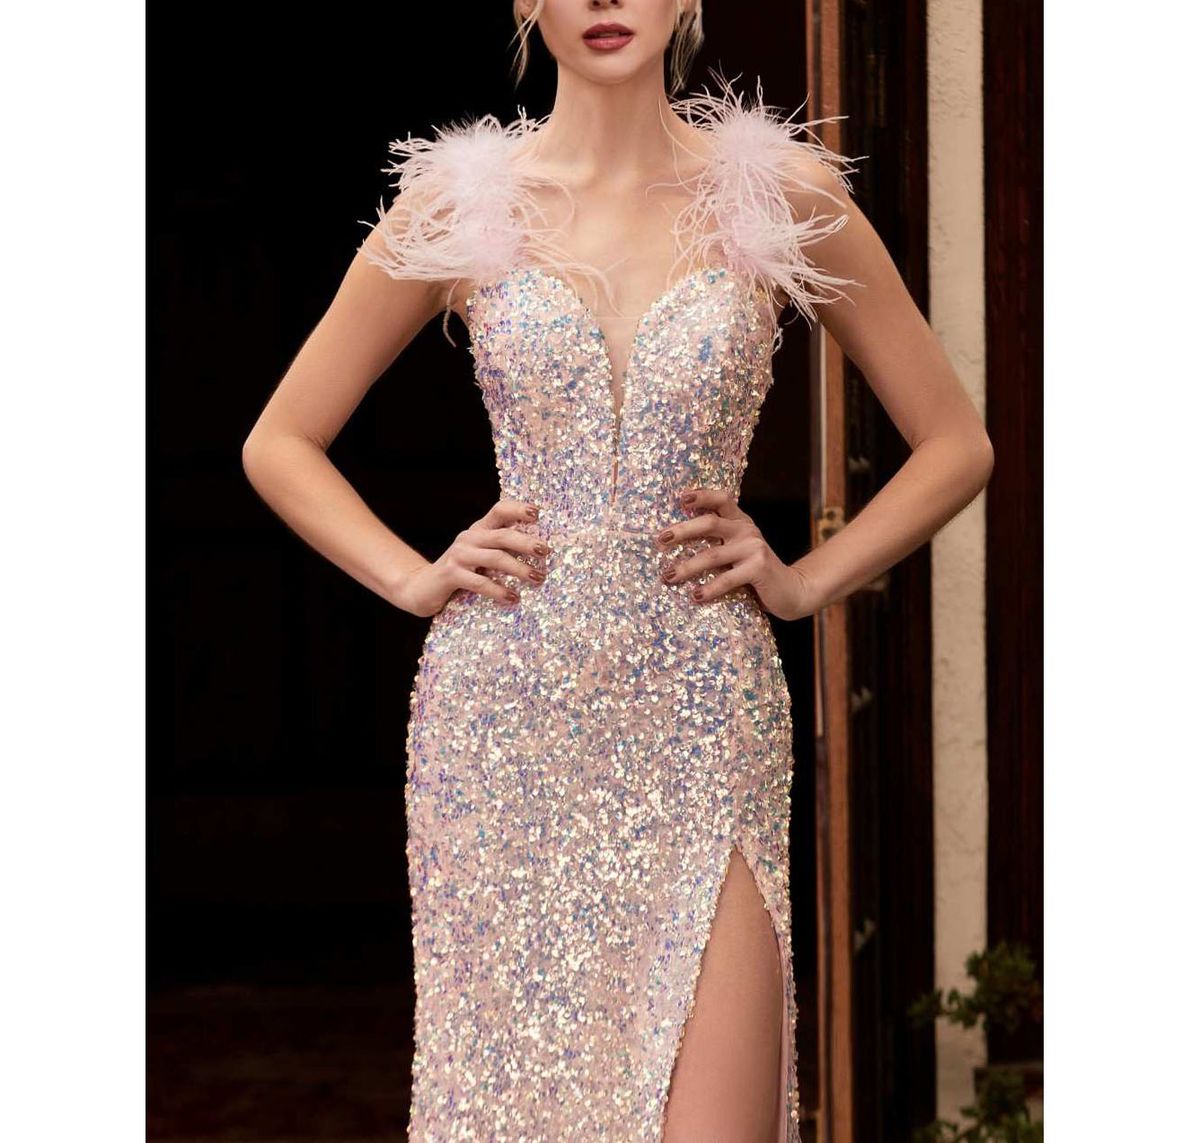 Style Blush Pink Formal Sweetheart Neckline Sequin & Feather Prom Dress 6 Cinderella Size 6 Prom Plunge Pink Side Slit Dress on Queenly